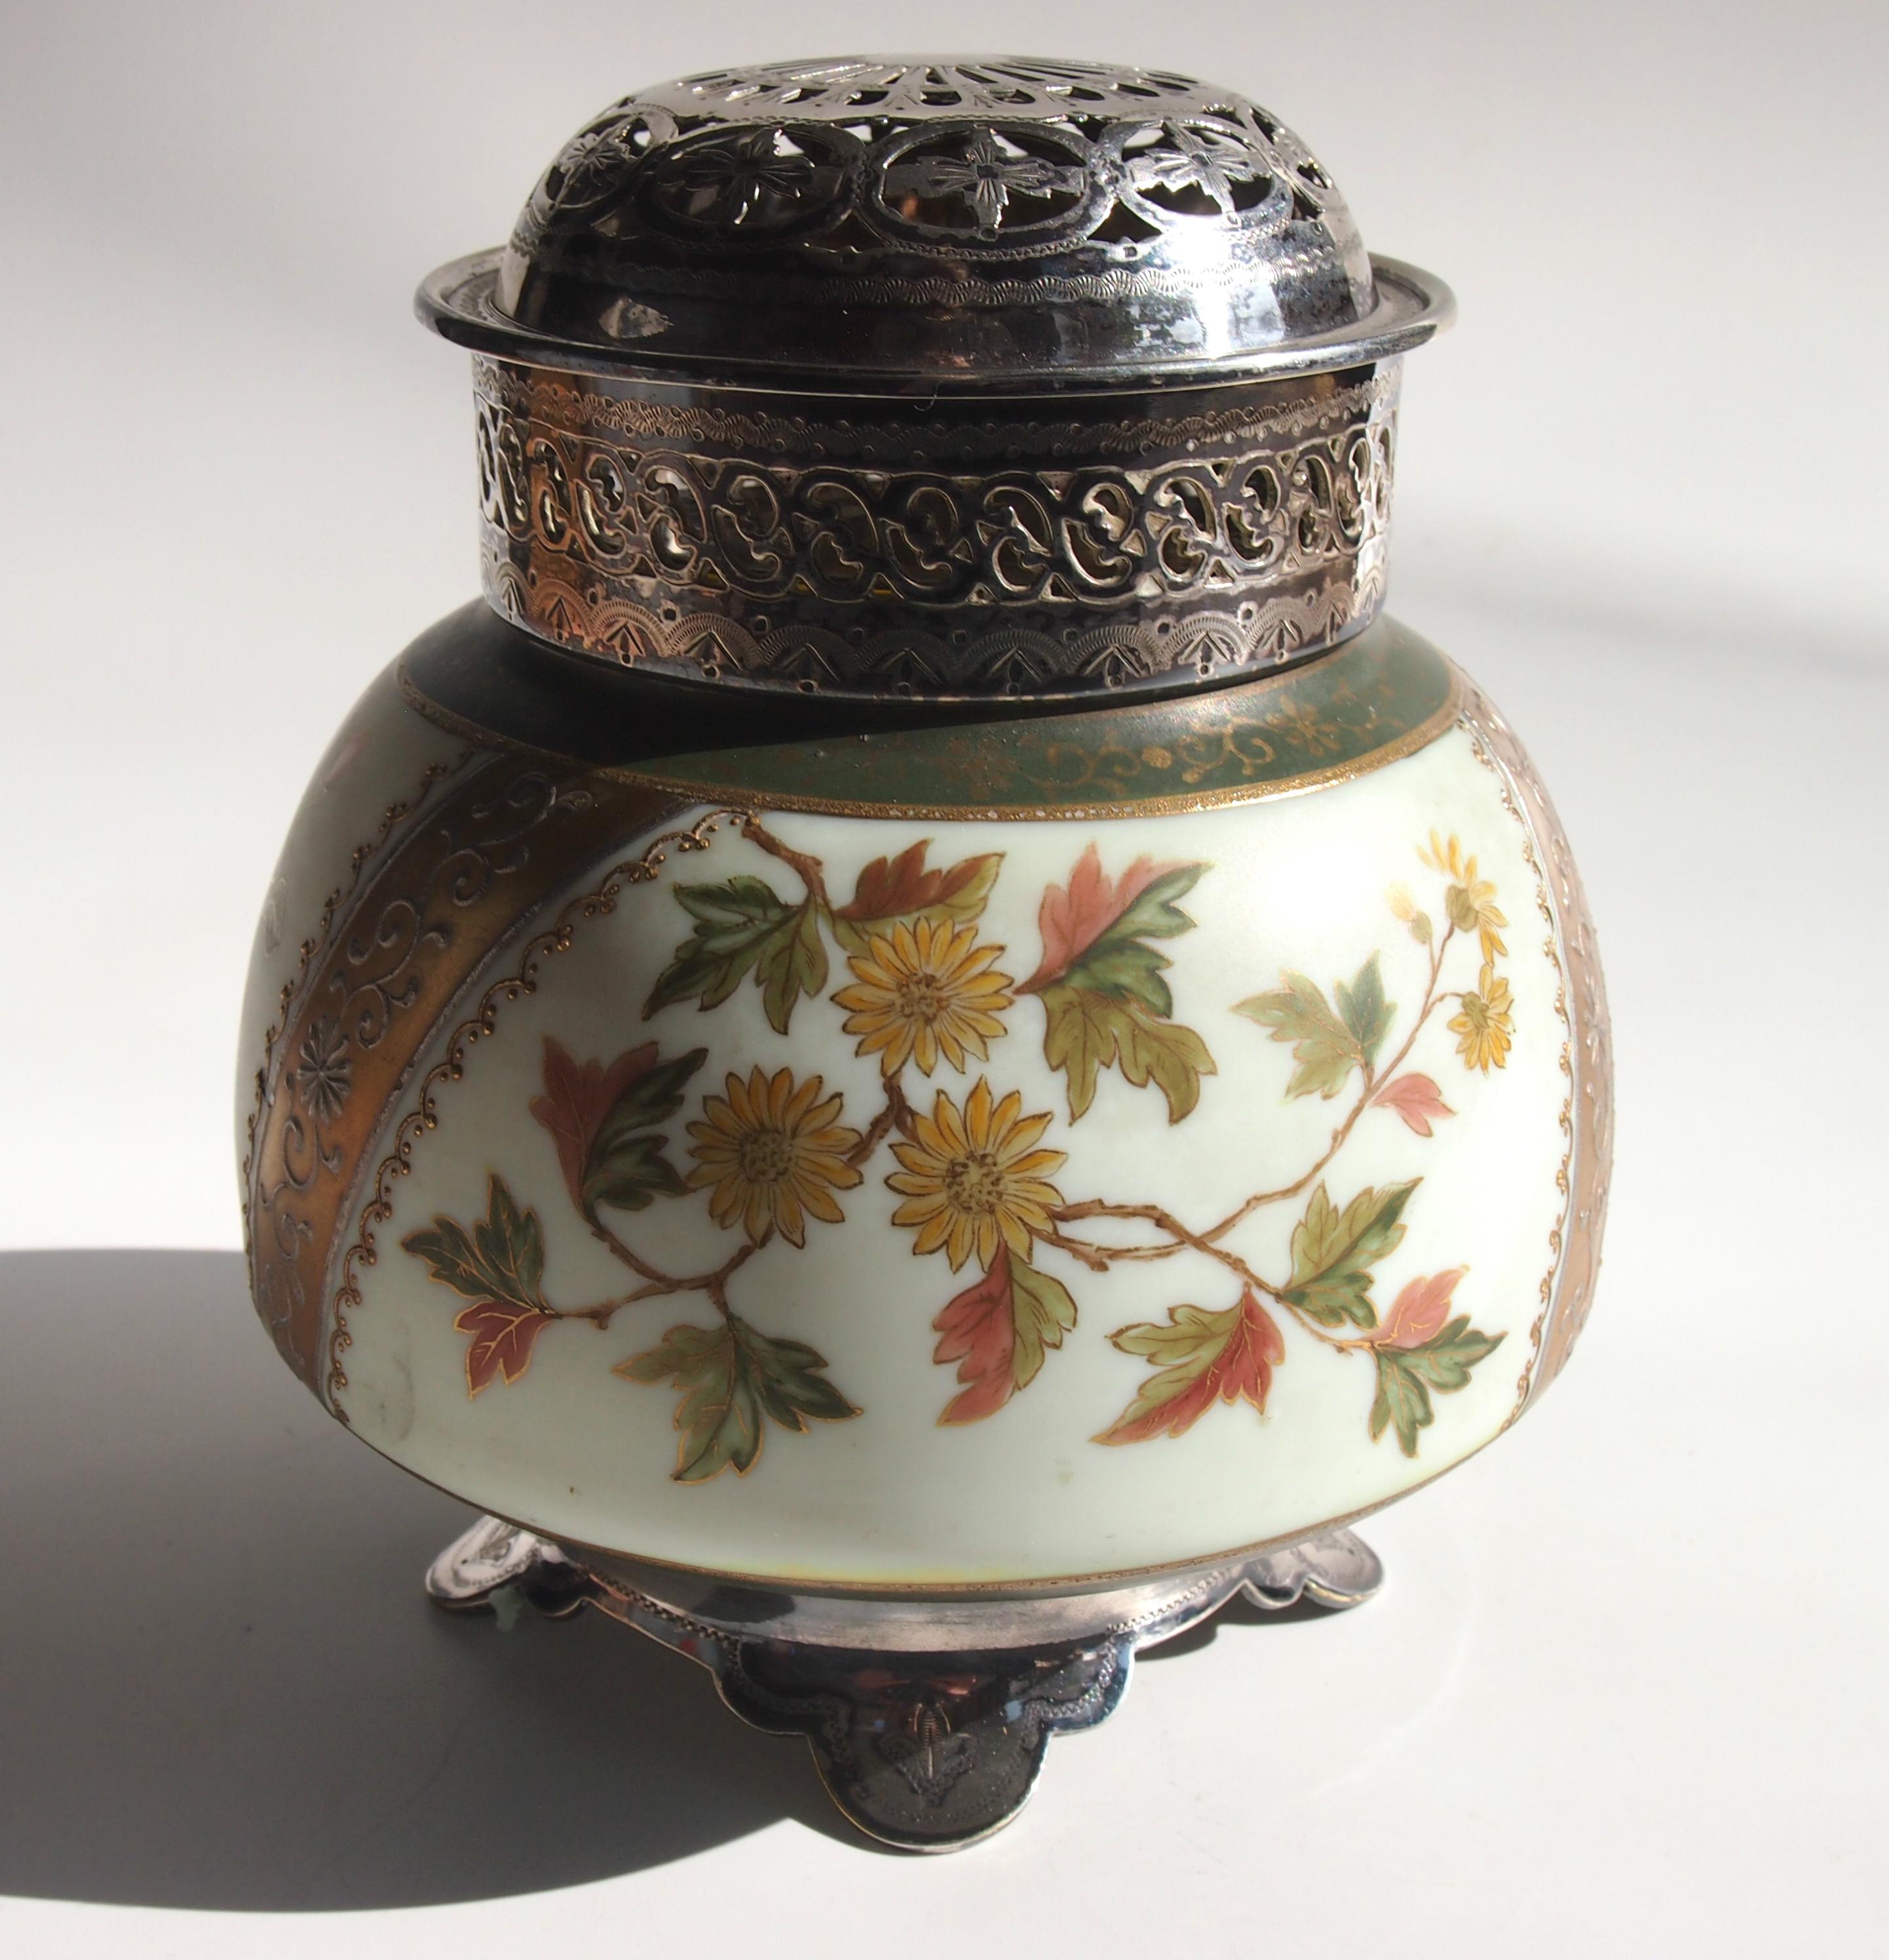 Unusual enamelled and gilded Victorian Harrach Potpurri holder with original white metal feet and collar with detachable pierced lid and separate two part inner filter made c1890. With an opaque cream base, it is enamelled with green gilded bands